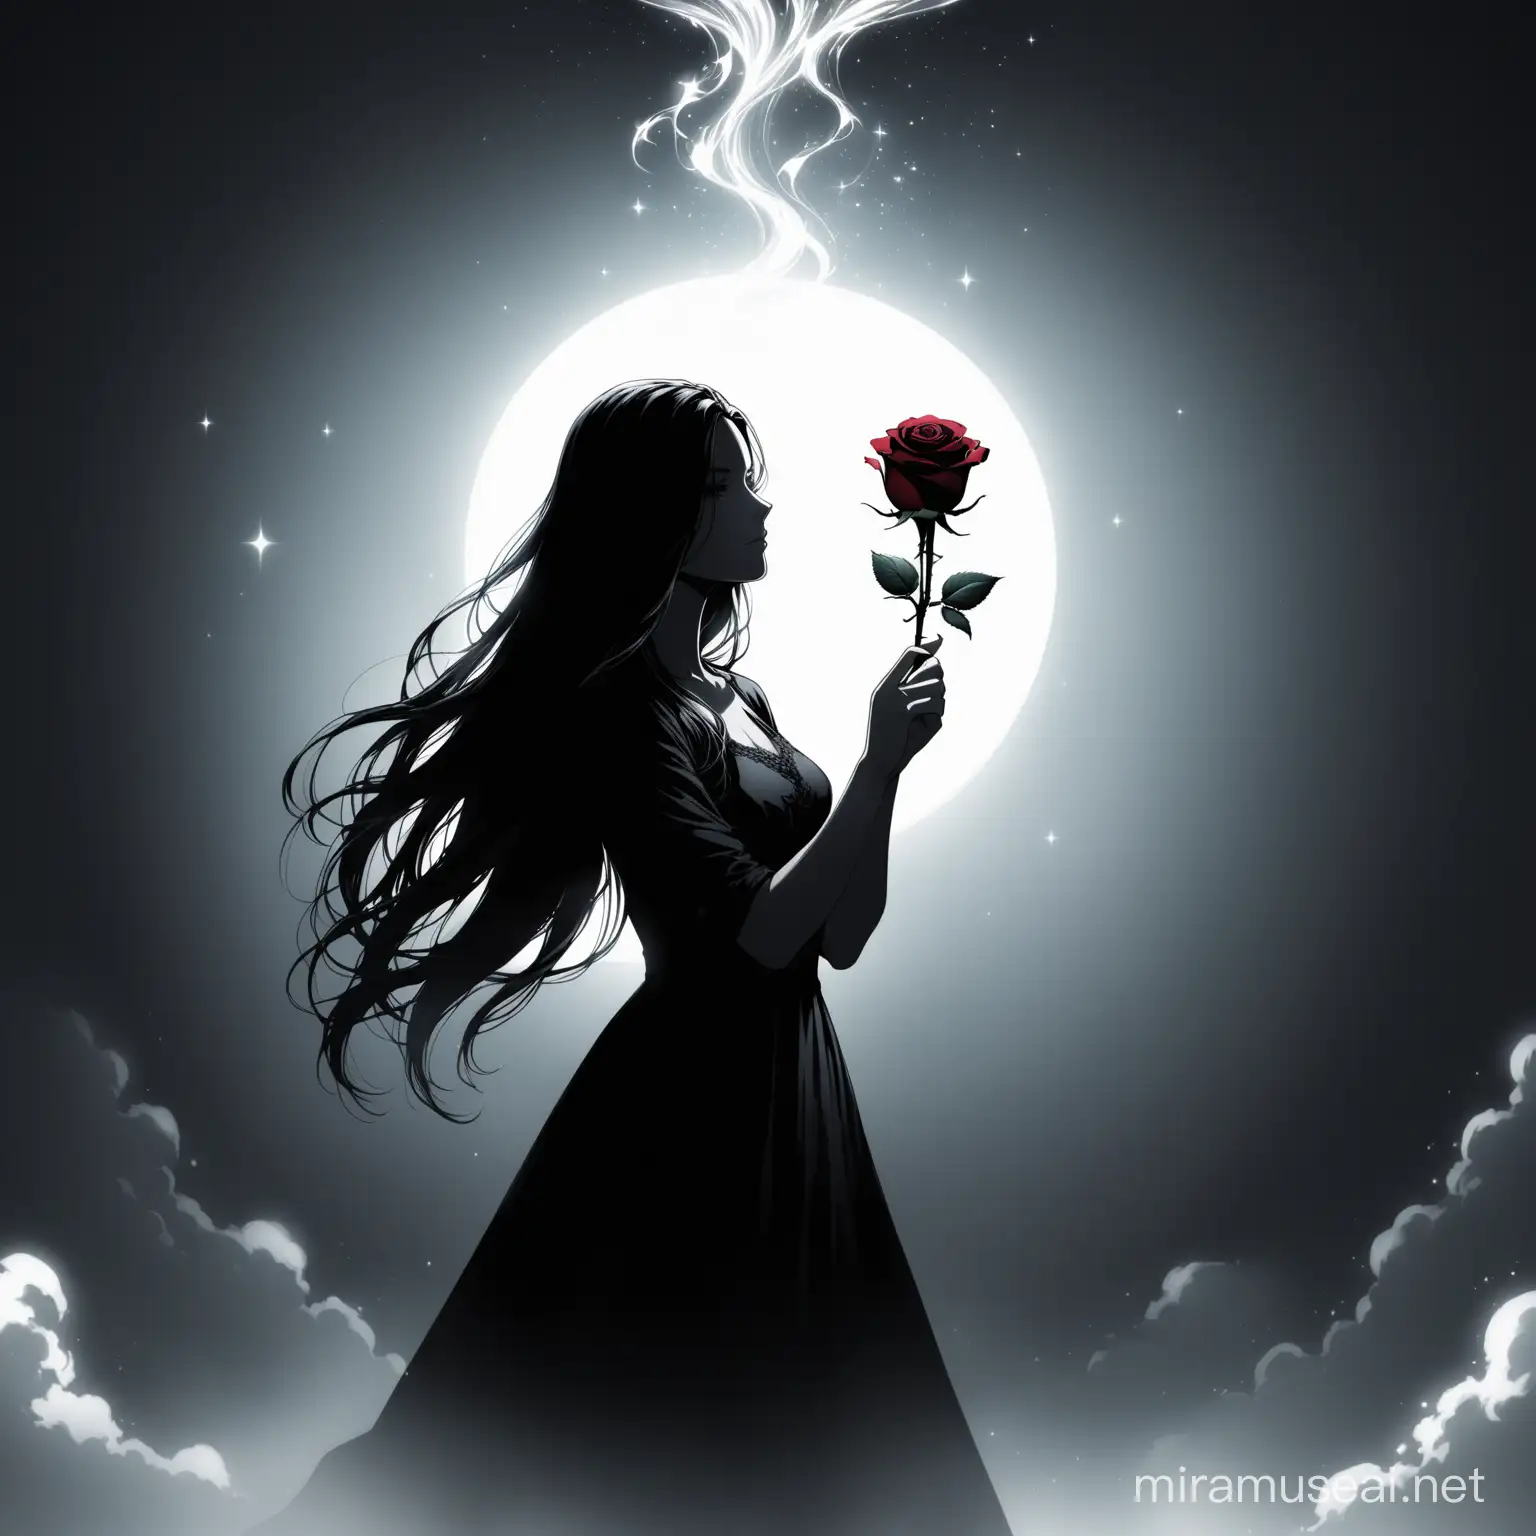 Pensive Woman with Rose in Hand Against White Sky Background